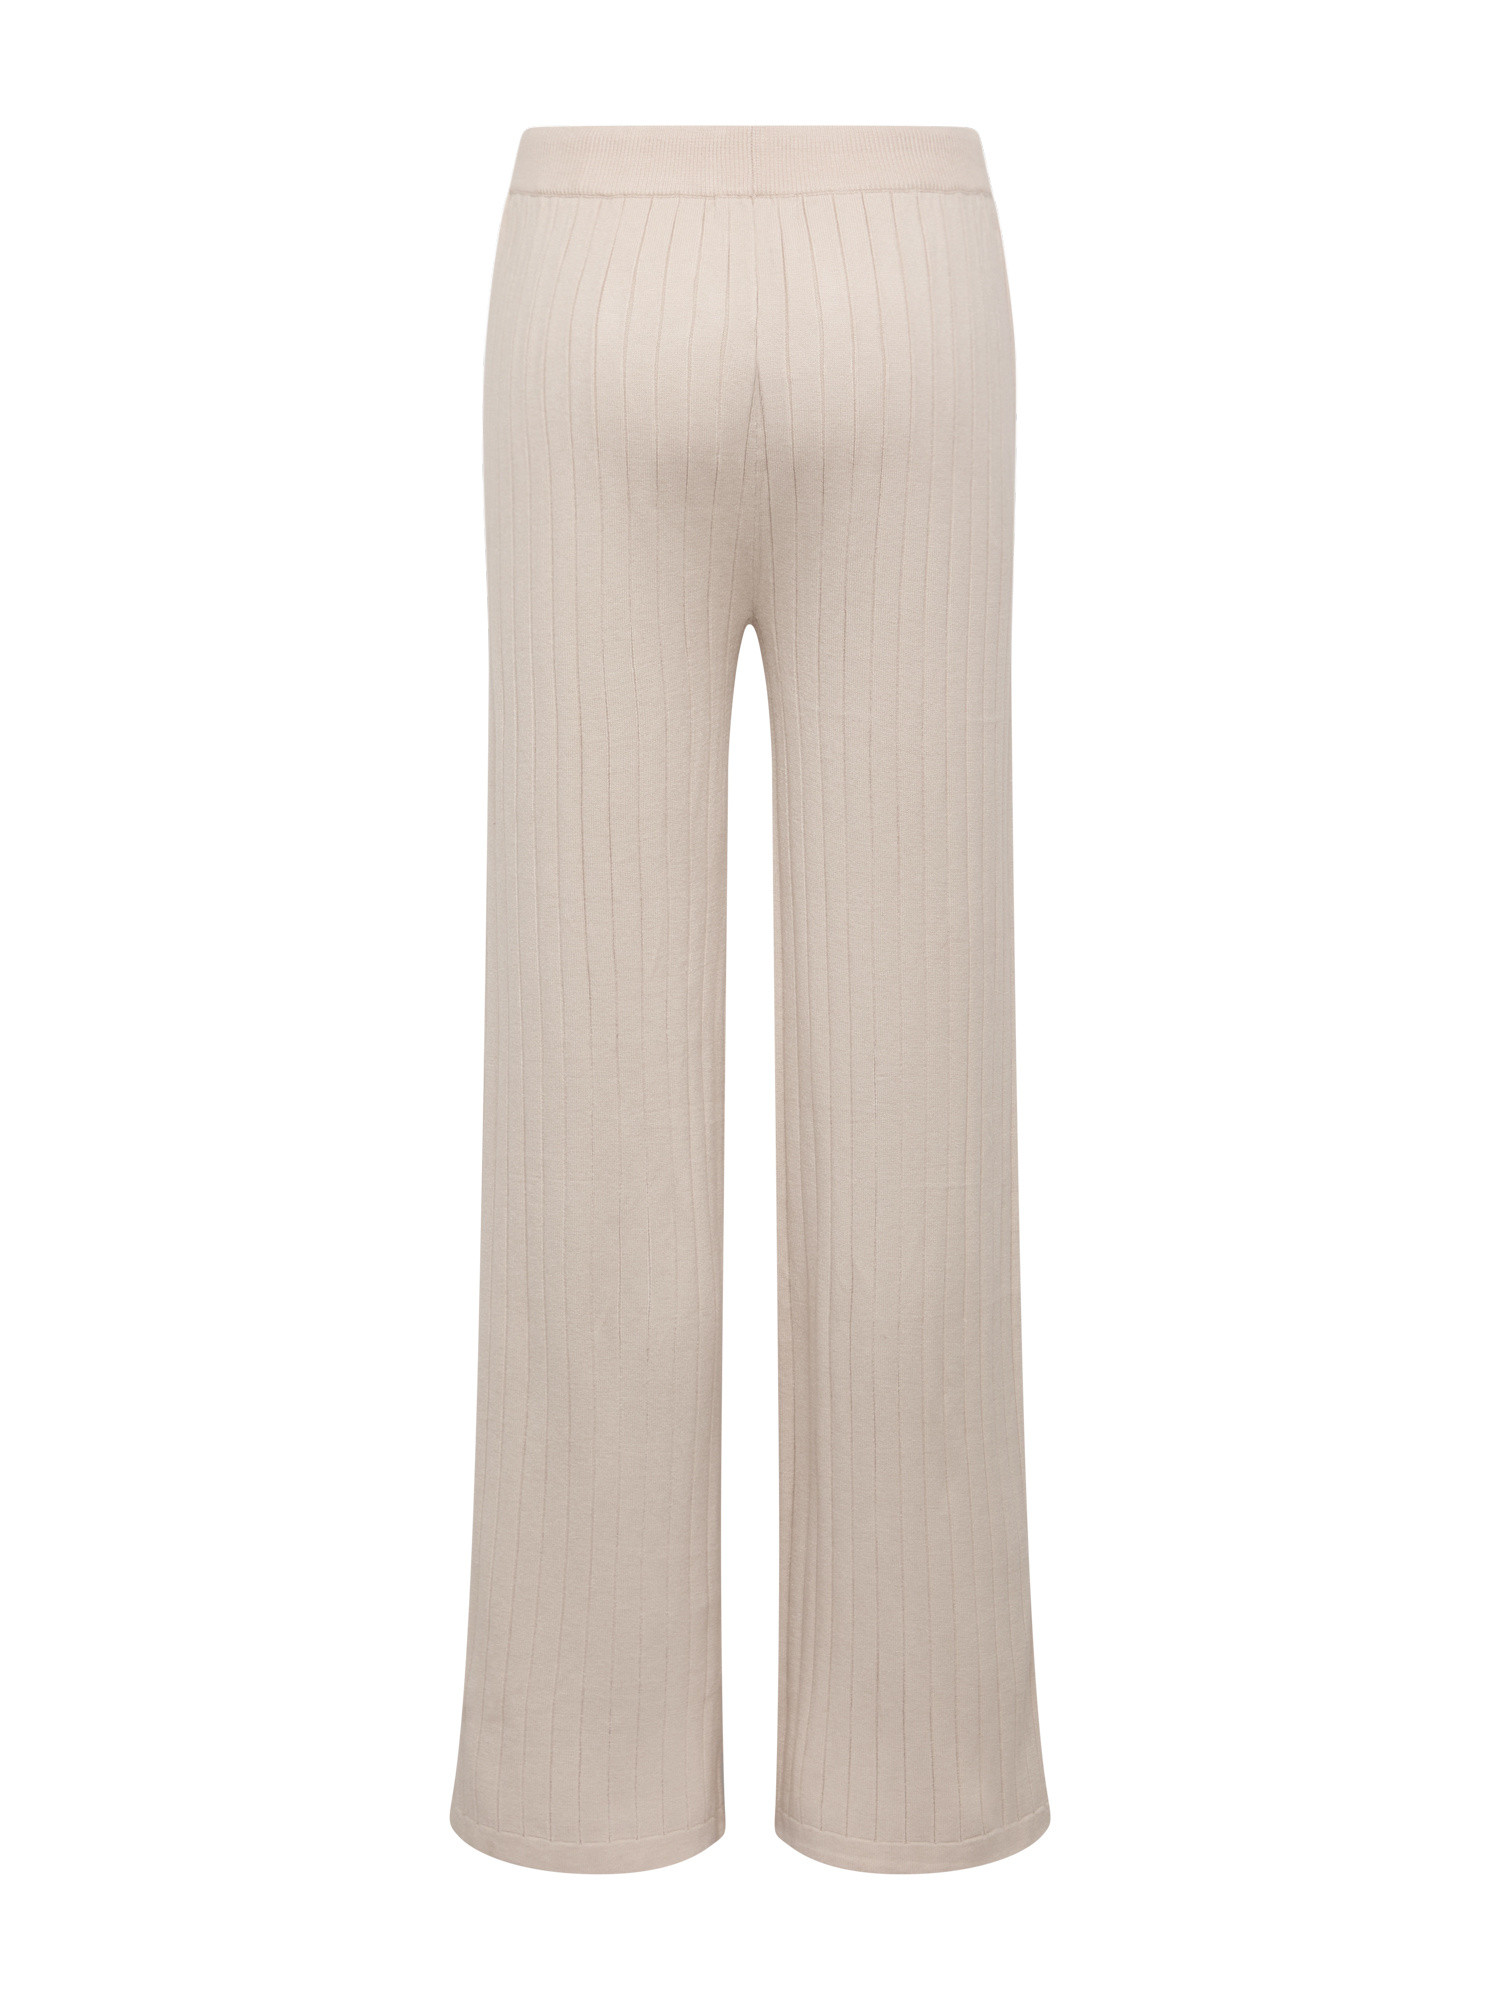 Koan - Ribbed knit trousers, Beige, large image number 1